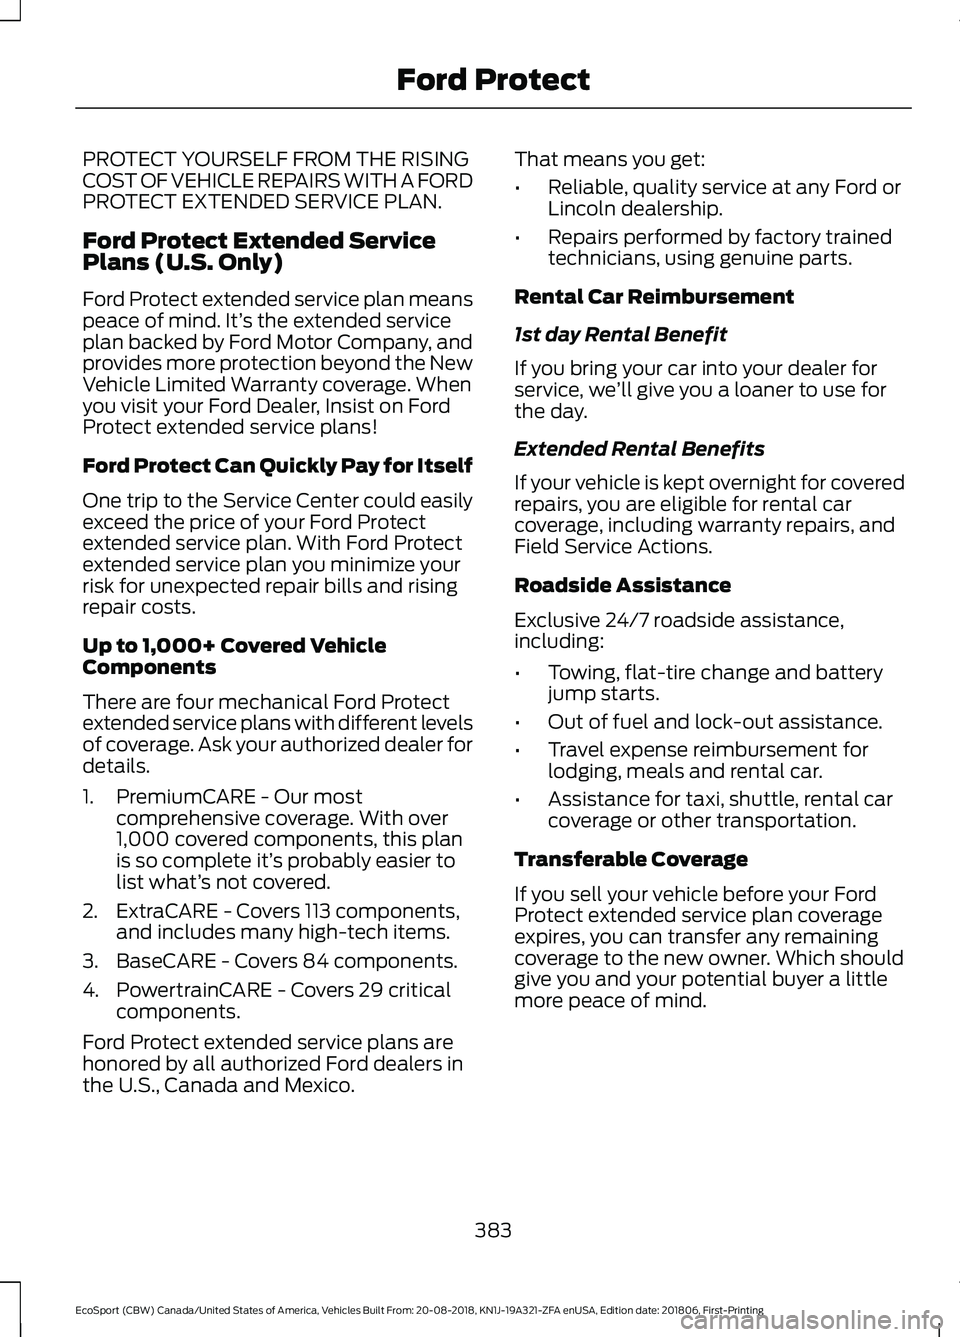 FORD ECOSPORT 2019  Owners Manual PROTECT YOURSELF FROM THE RISINGCOST OF VEHICLE REPAIRS WITH A FORDPROTECT EXTENDED SERVICE PLAN.
Ford Protect Extended ServicePlans (U.S. Only)
Ford Protect extended service plan meanspeace of mind. 